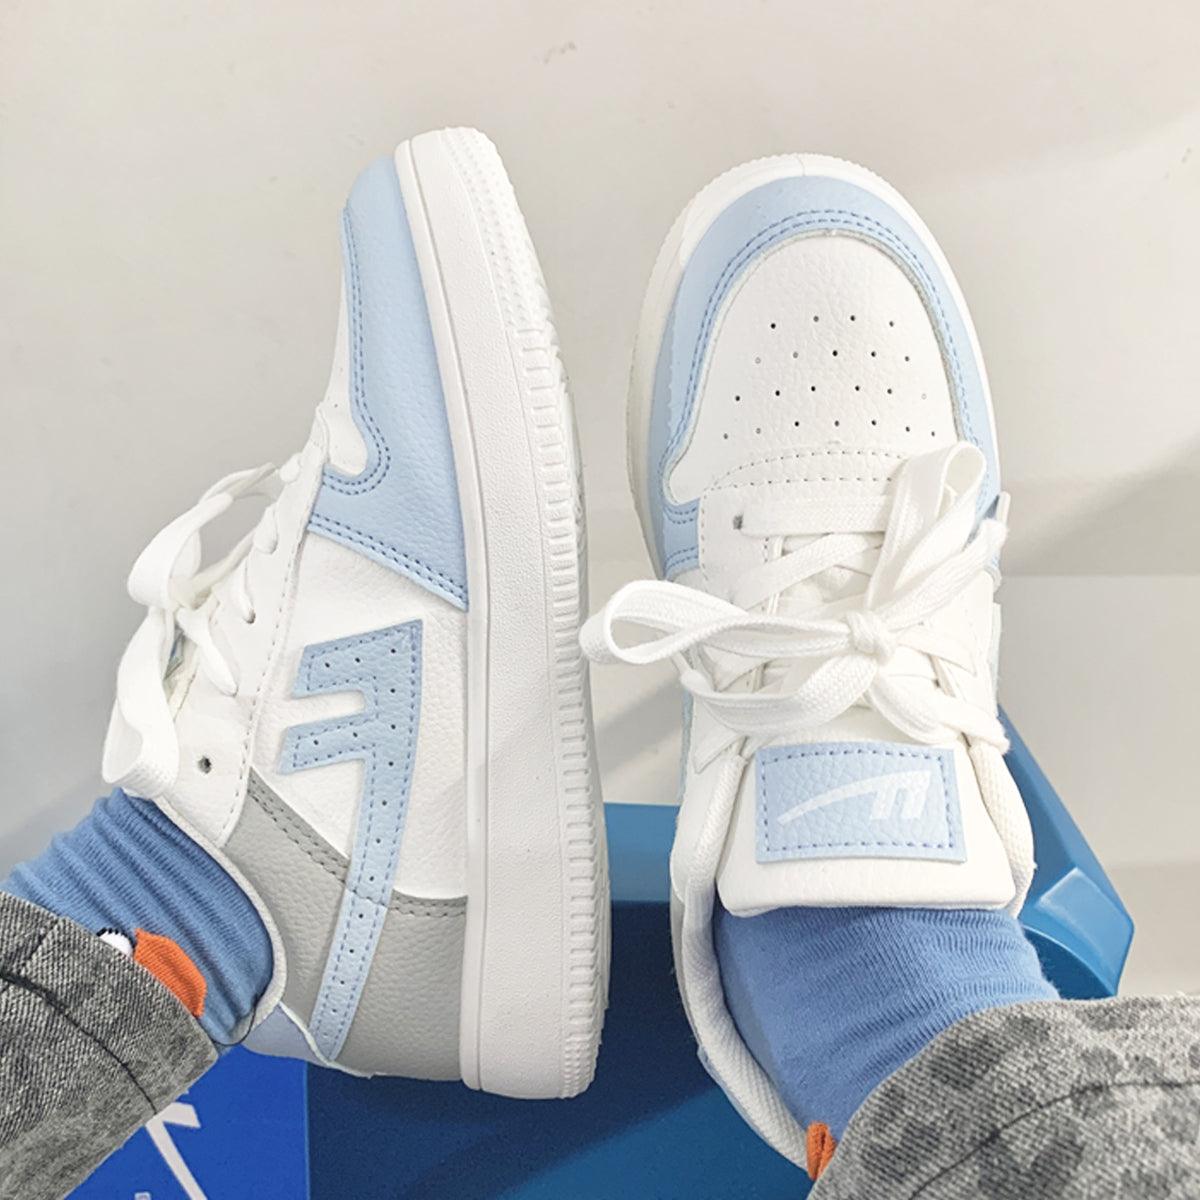 Pastel Blue Softie Aesthetic Sneakers - Aesthetic Clothes Shop